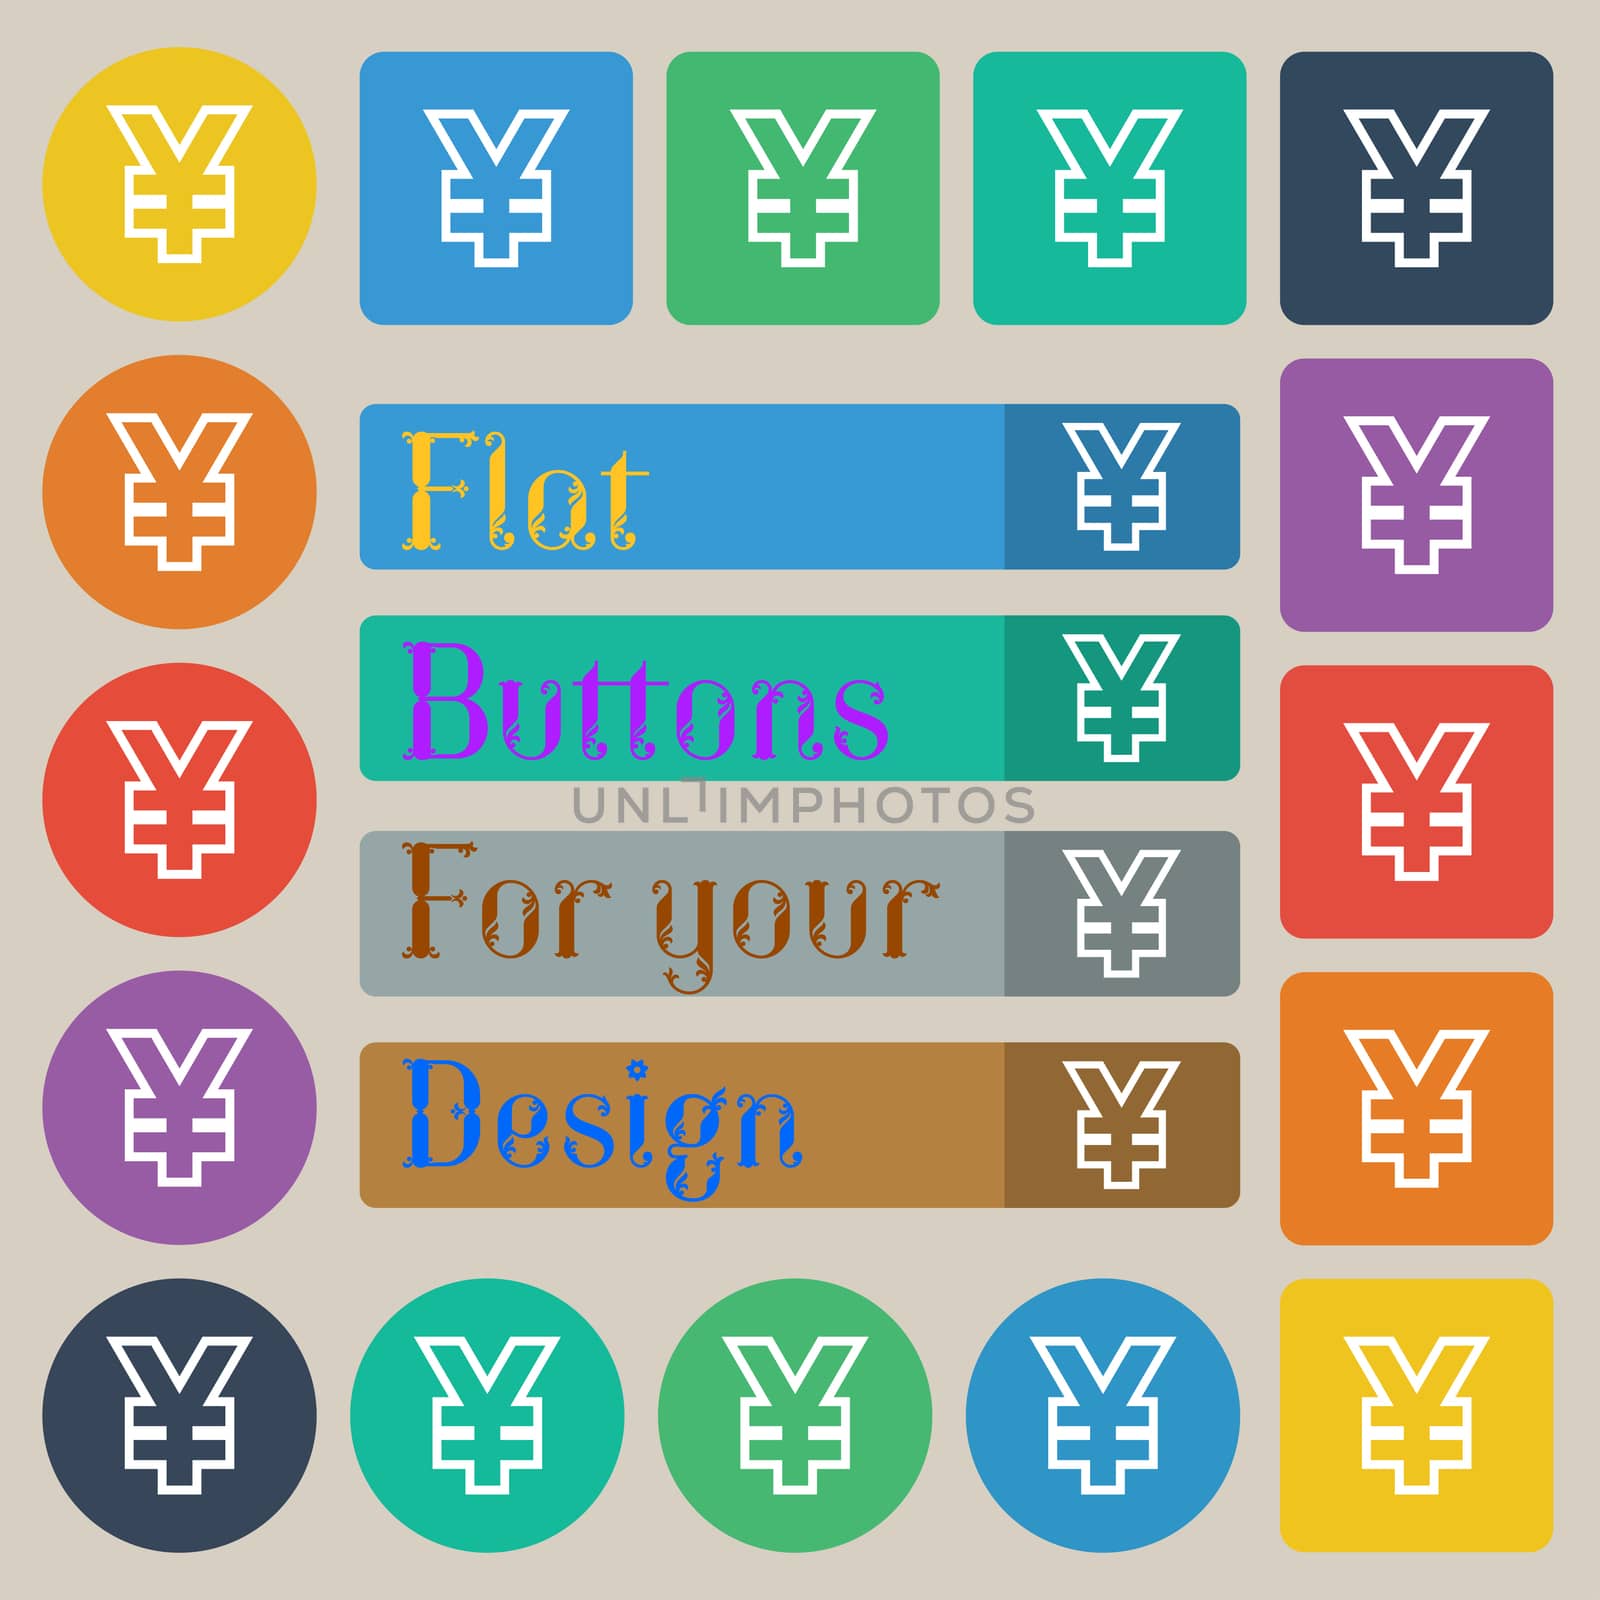 Yen JPY icon sign. Set of twenty colored flat, round, square and rectangular buttons. illustration